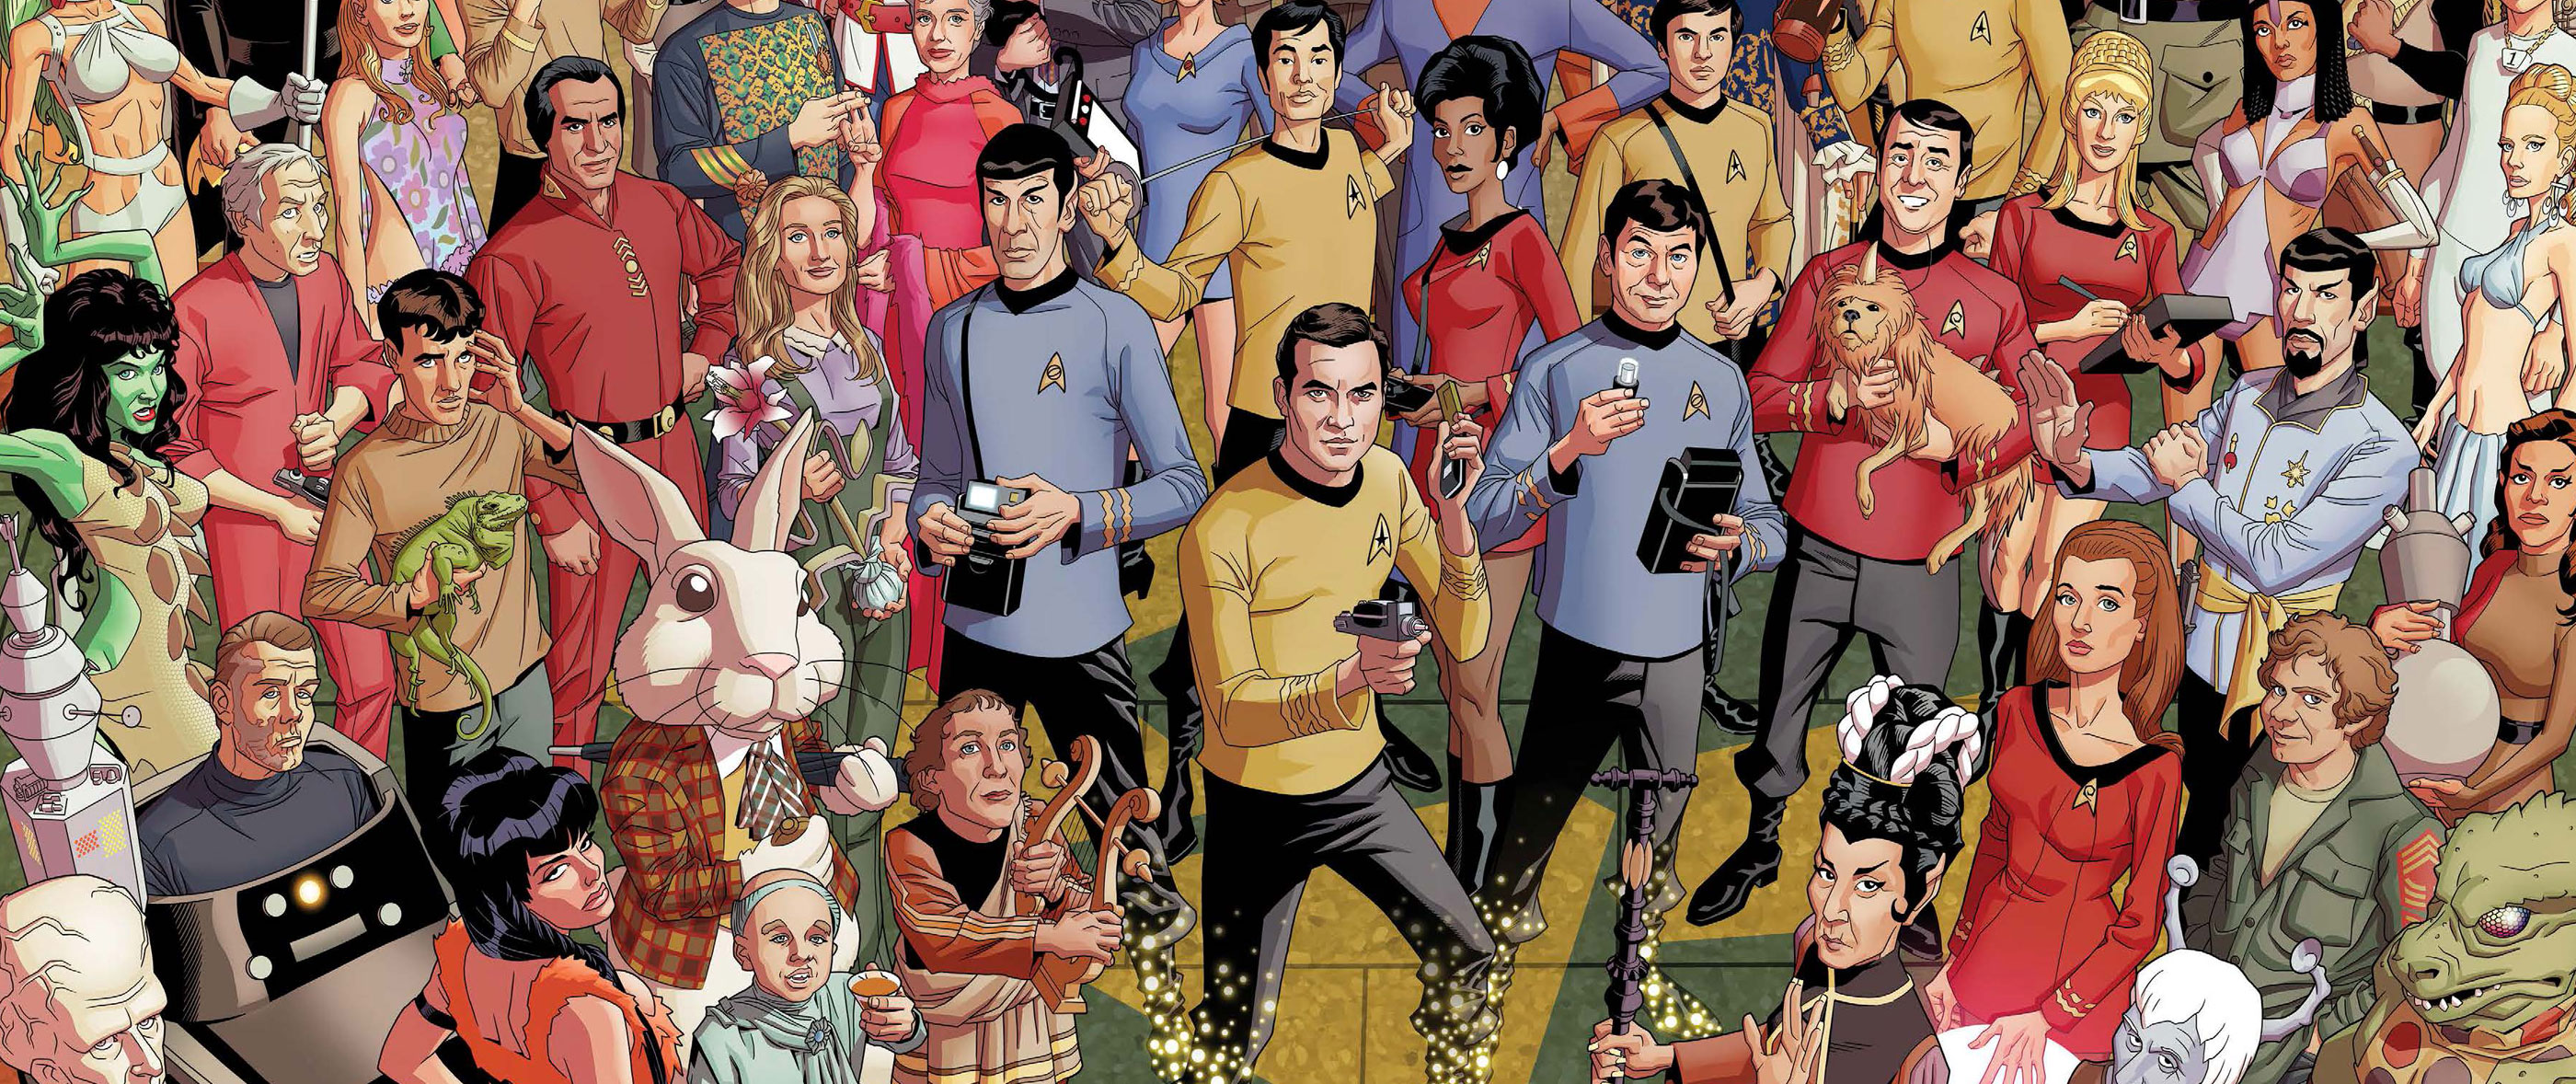 Set to be released as a jigsaw by Jumbo Games in the UK, this amazing Star Trek artwork by Dusty Abell is also available worldwide as an officially-licensed poster direct from the artist